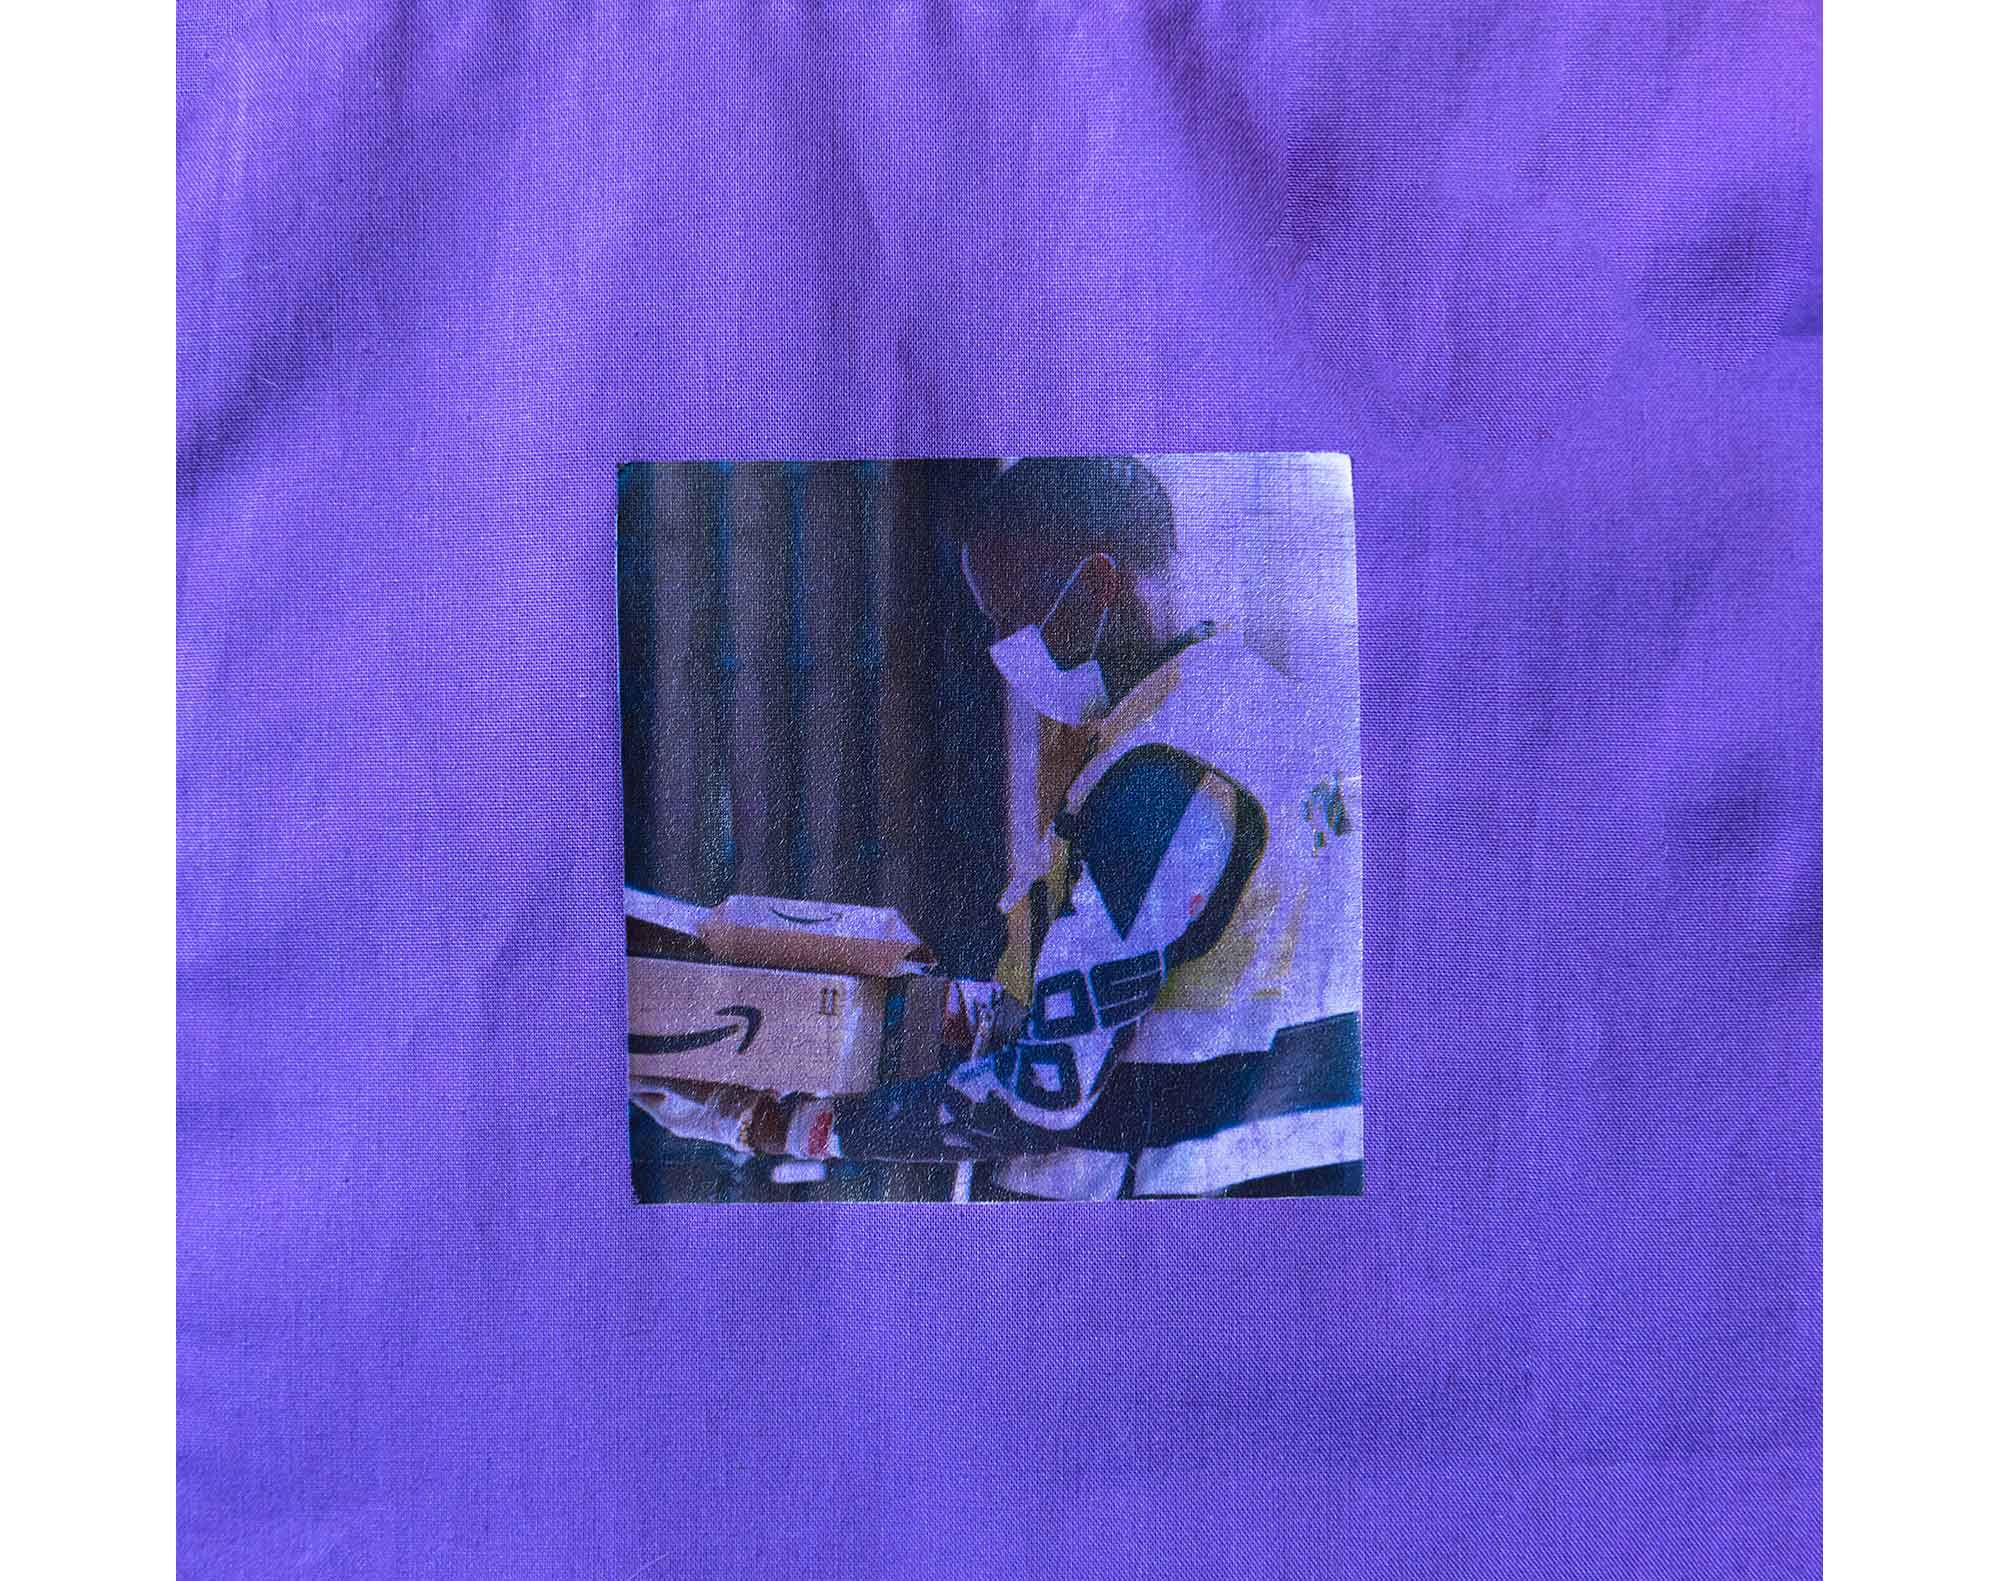 Essential worker, ironed pigment print on cotton